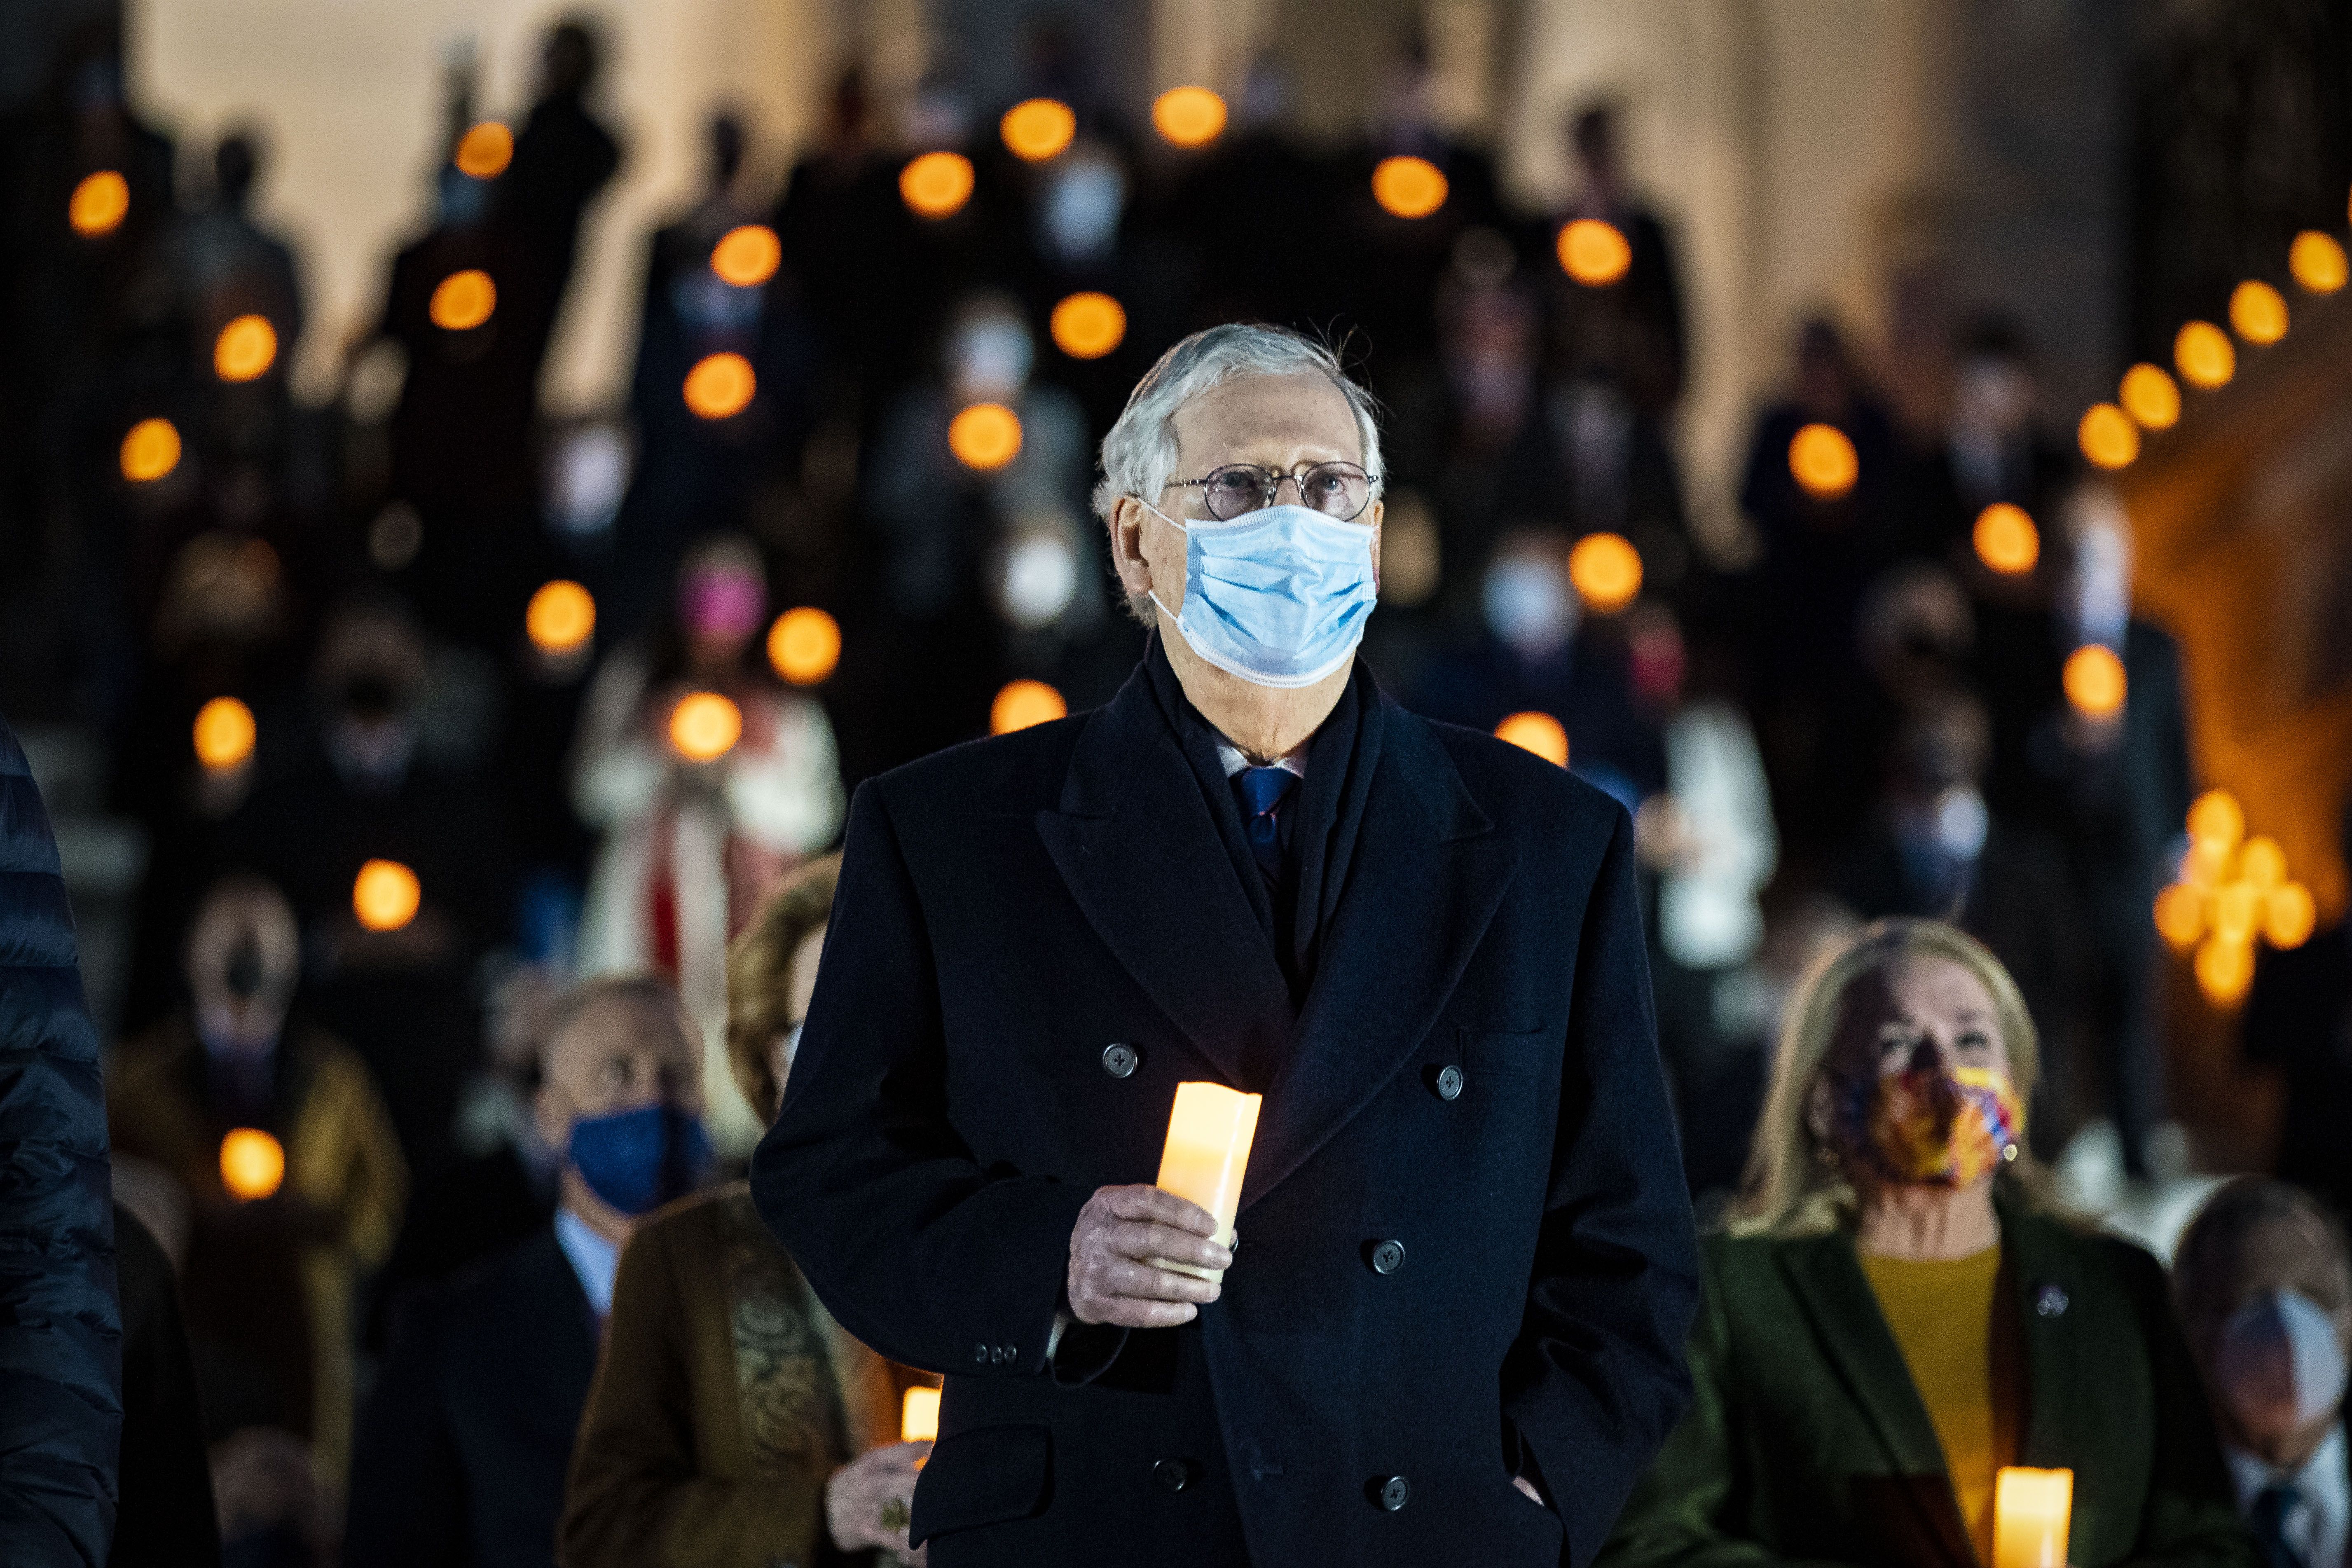 Senate Minority Leader Mitch McConnell holding a candle outside of the Capitol on Feb. 23.